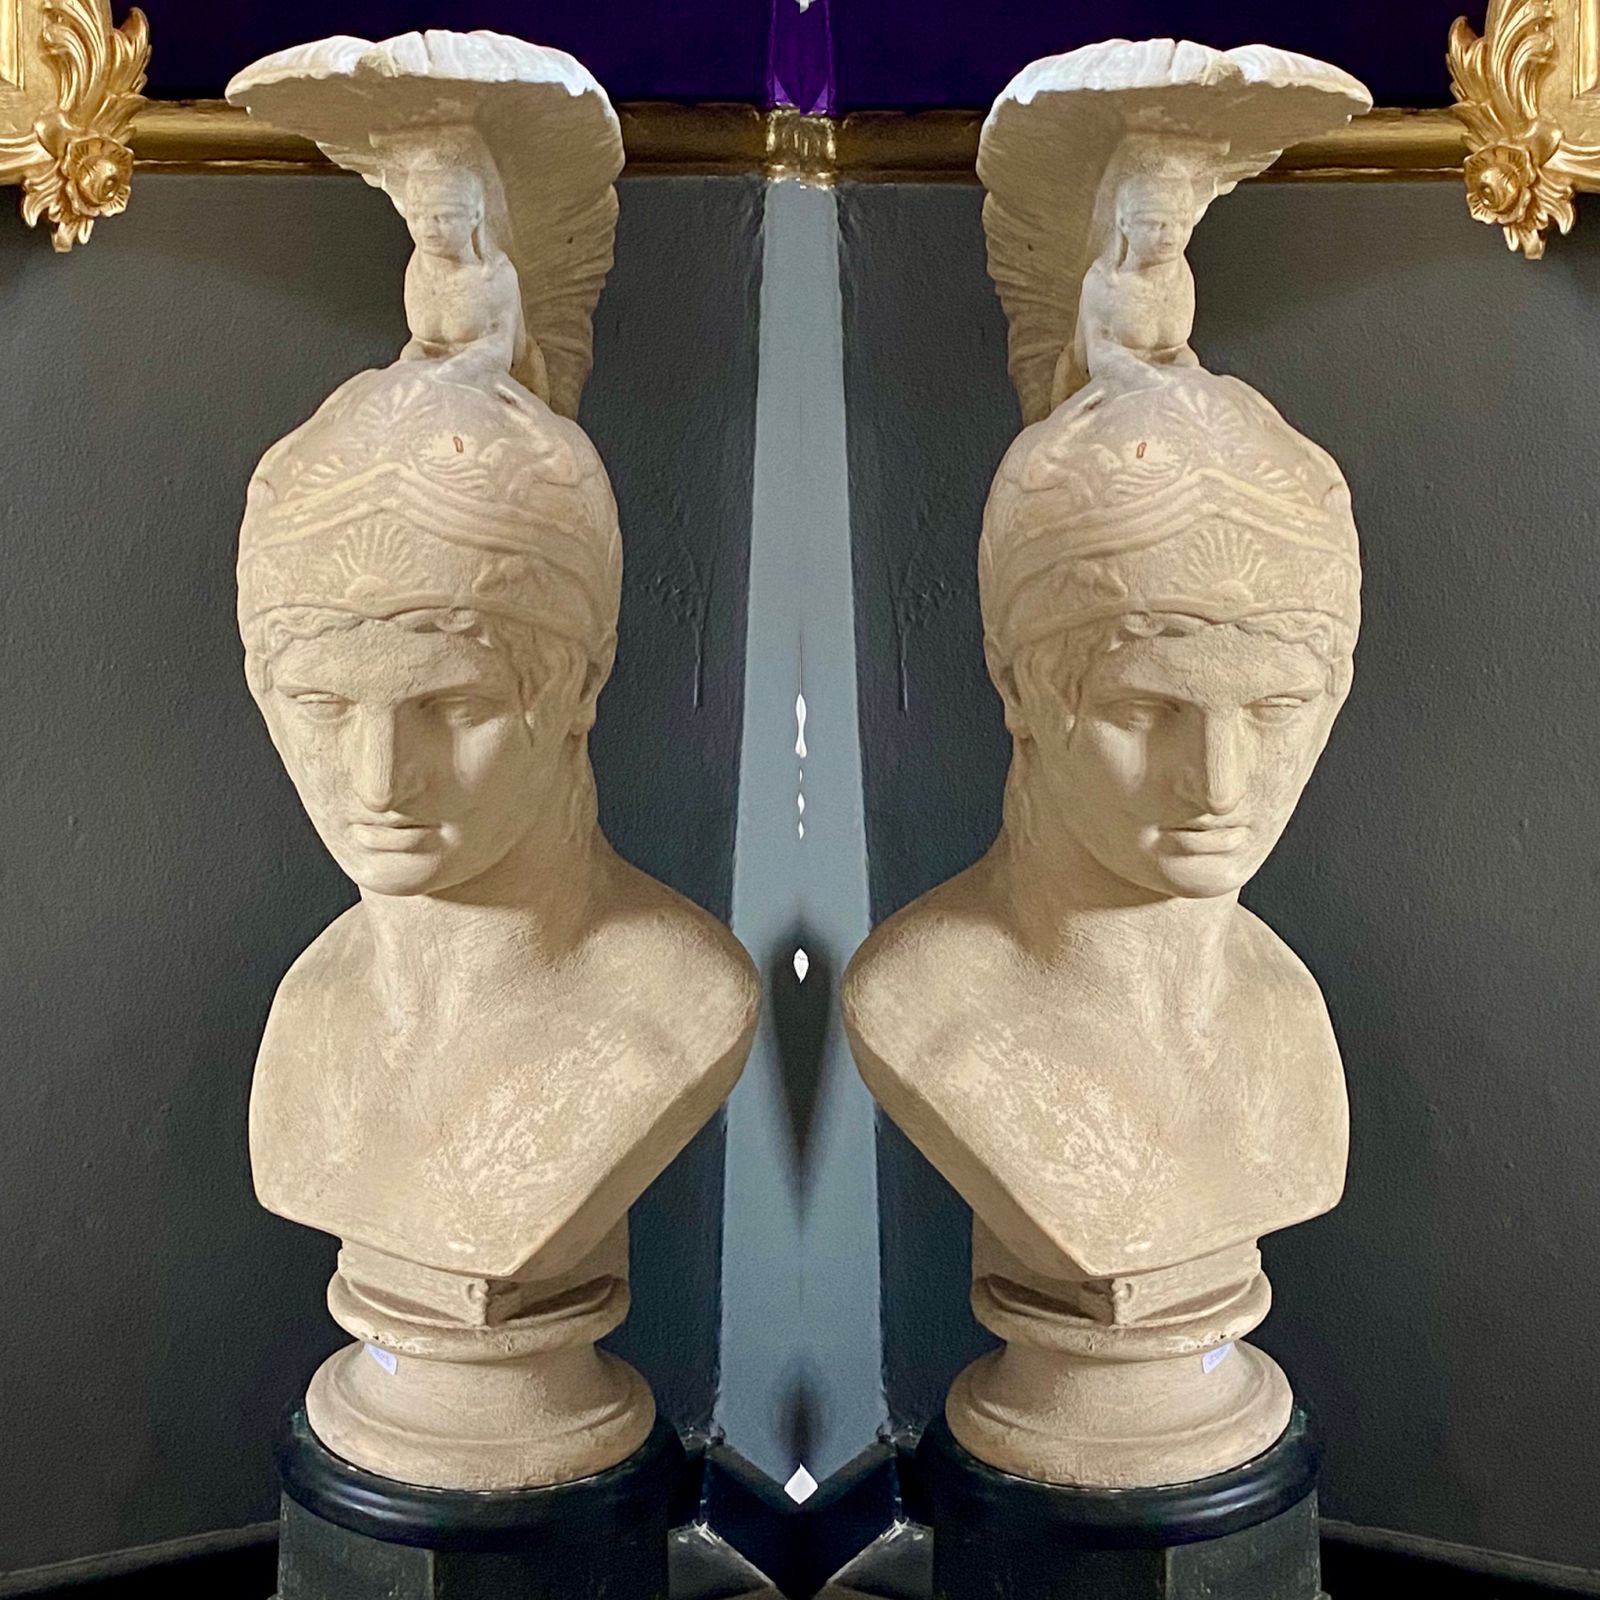 A Pair of Roman Soldier Busts